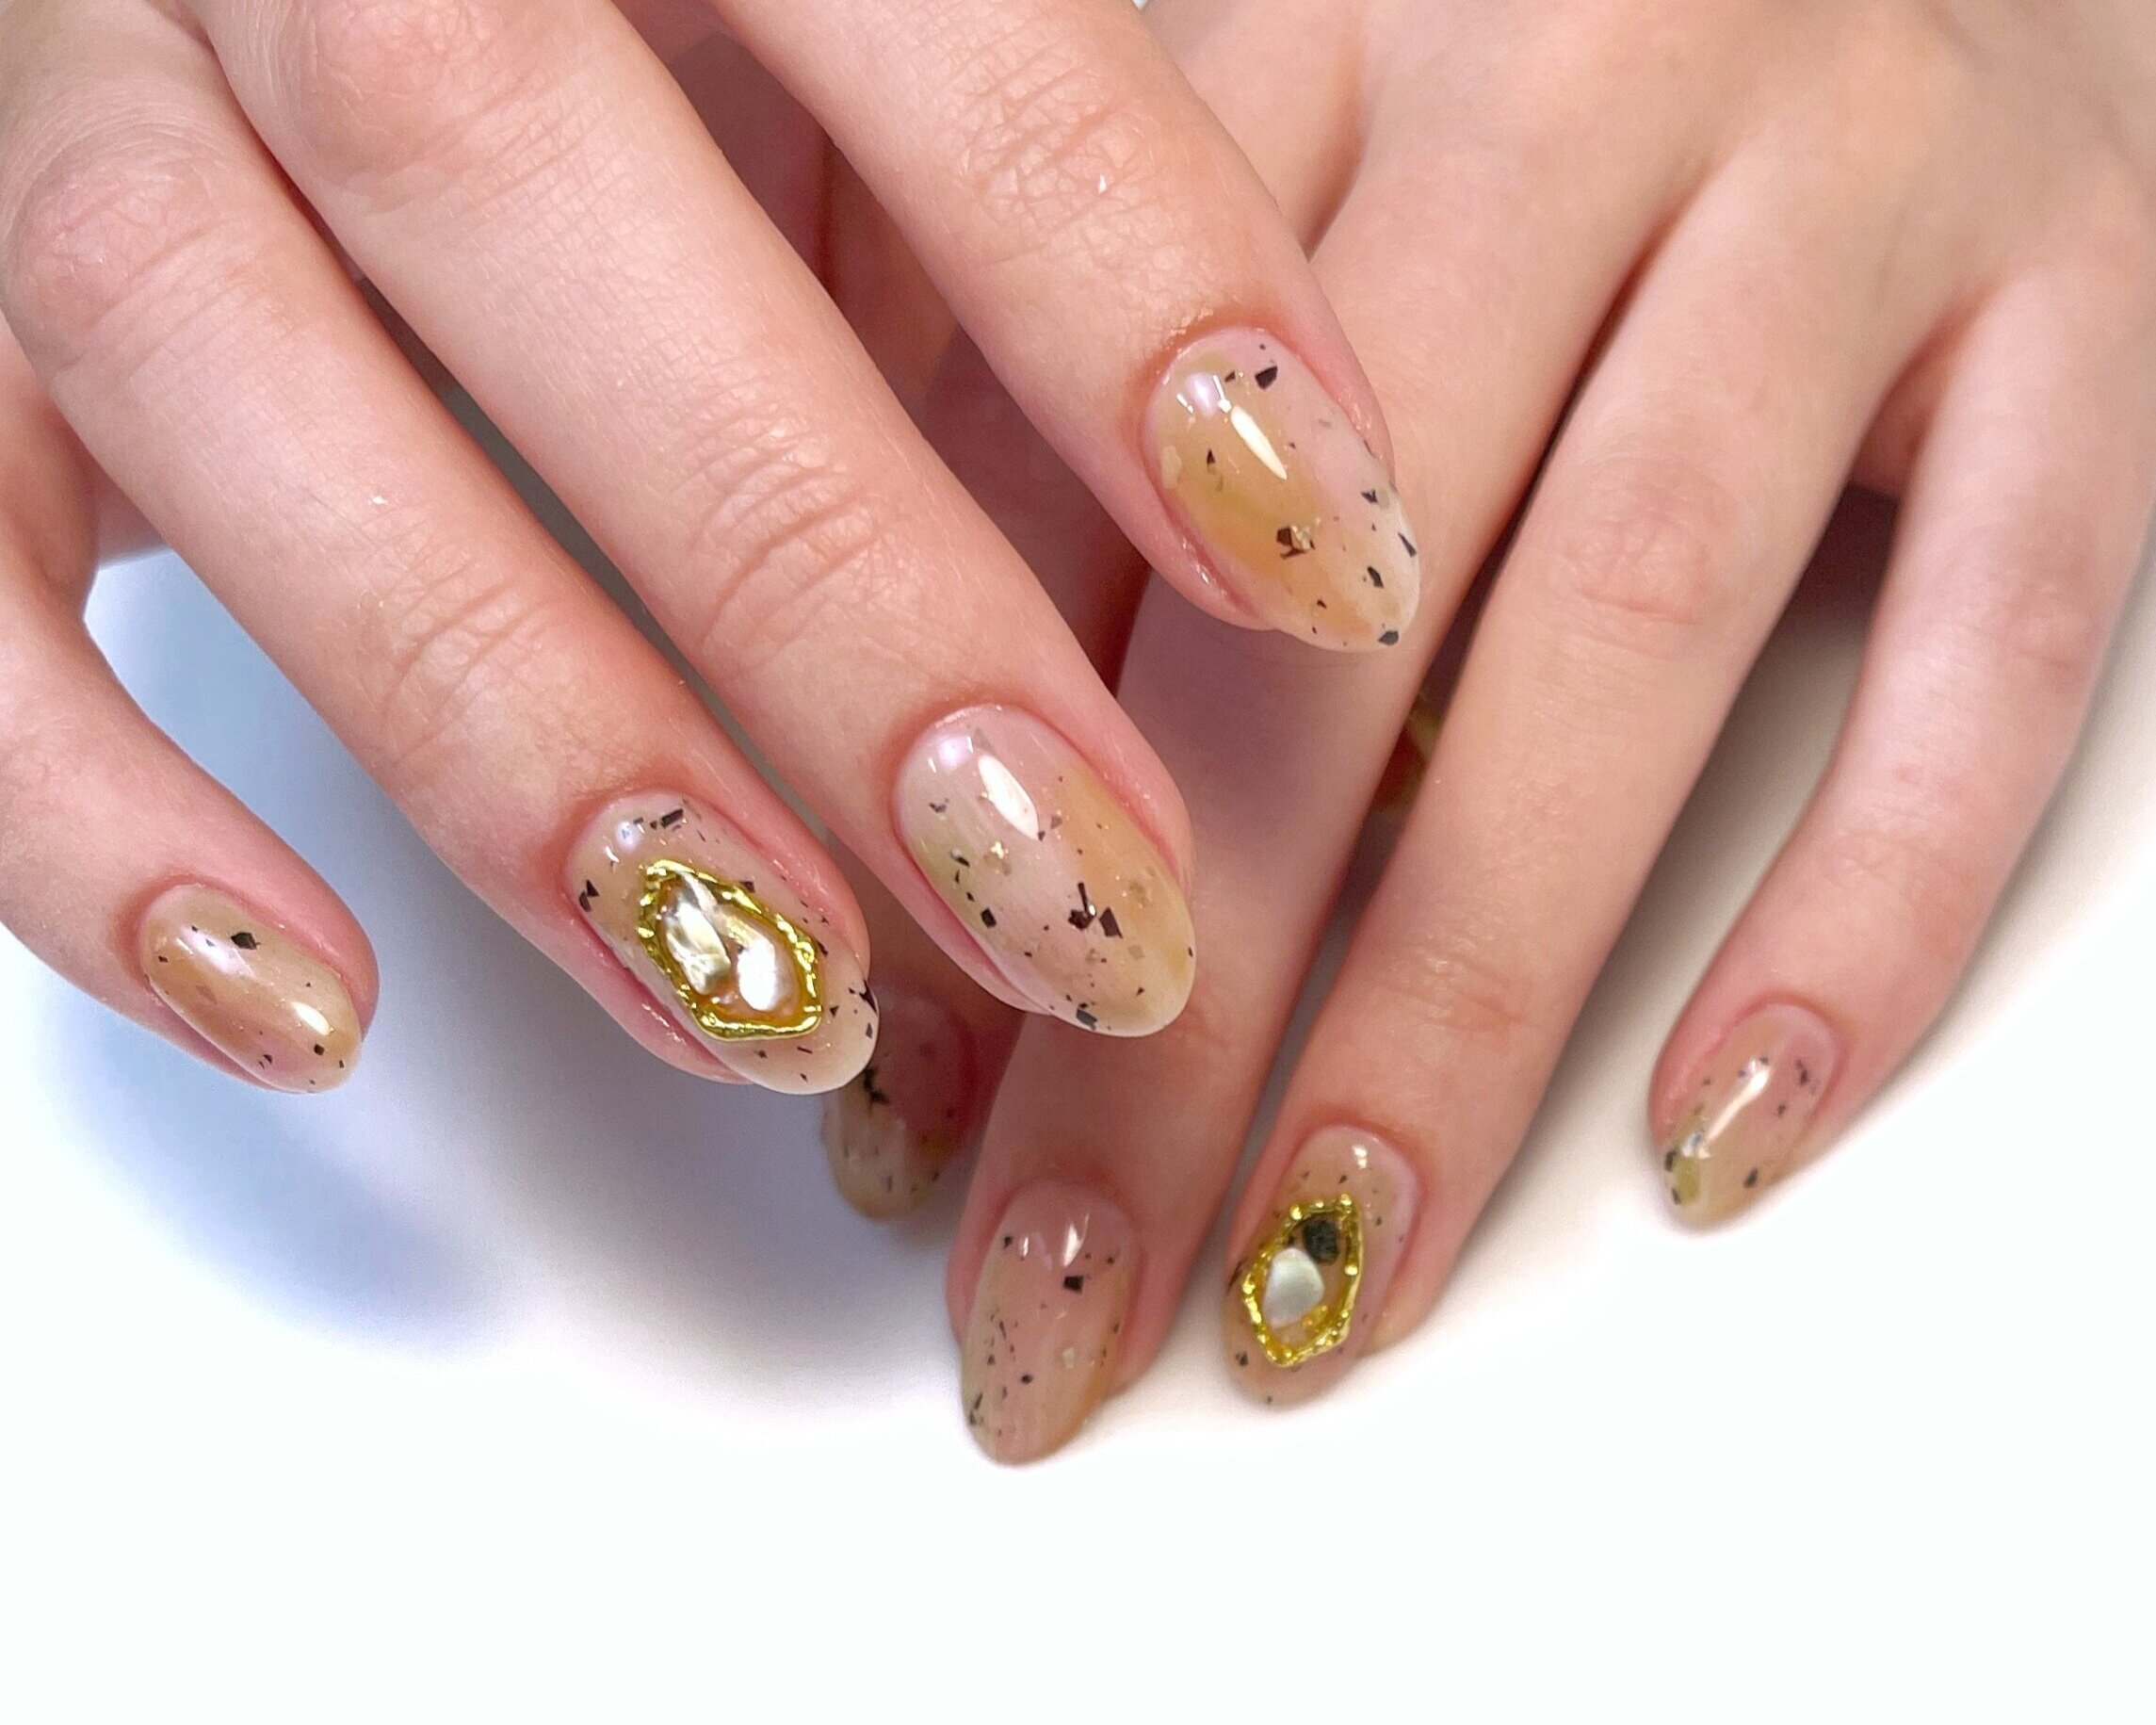 Learn Traditional Japanese Nail Art at Kyoto Beauty School - wide 5